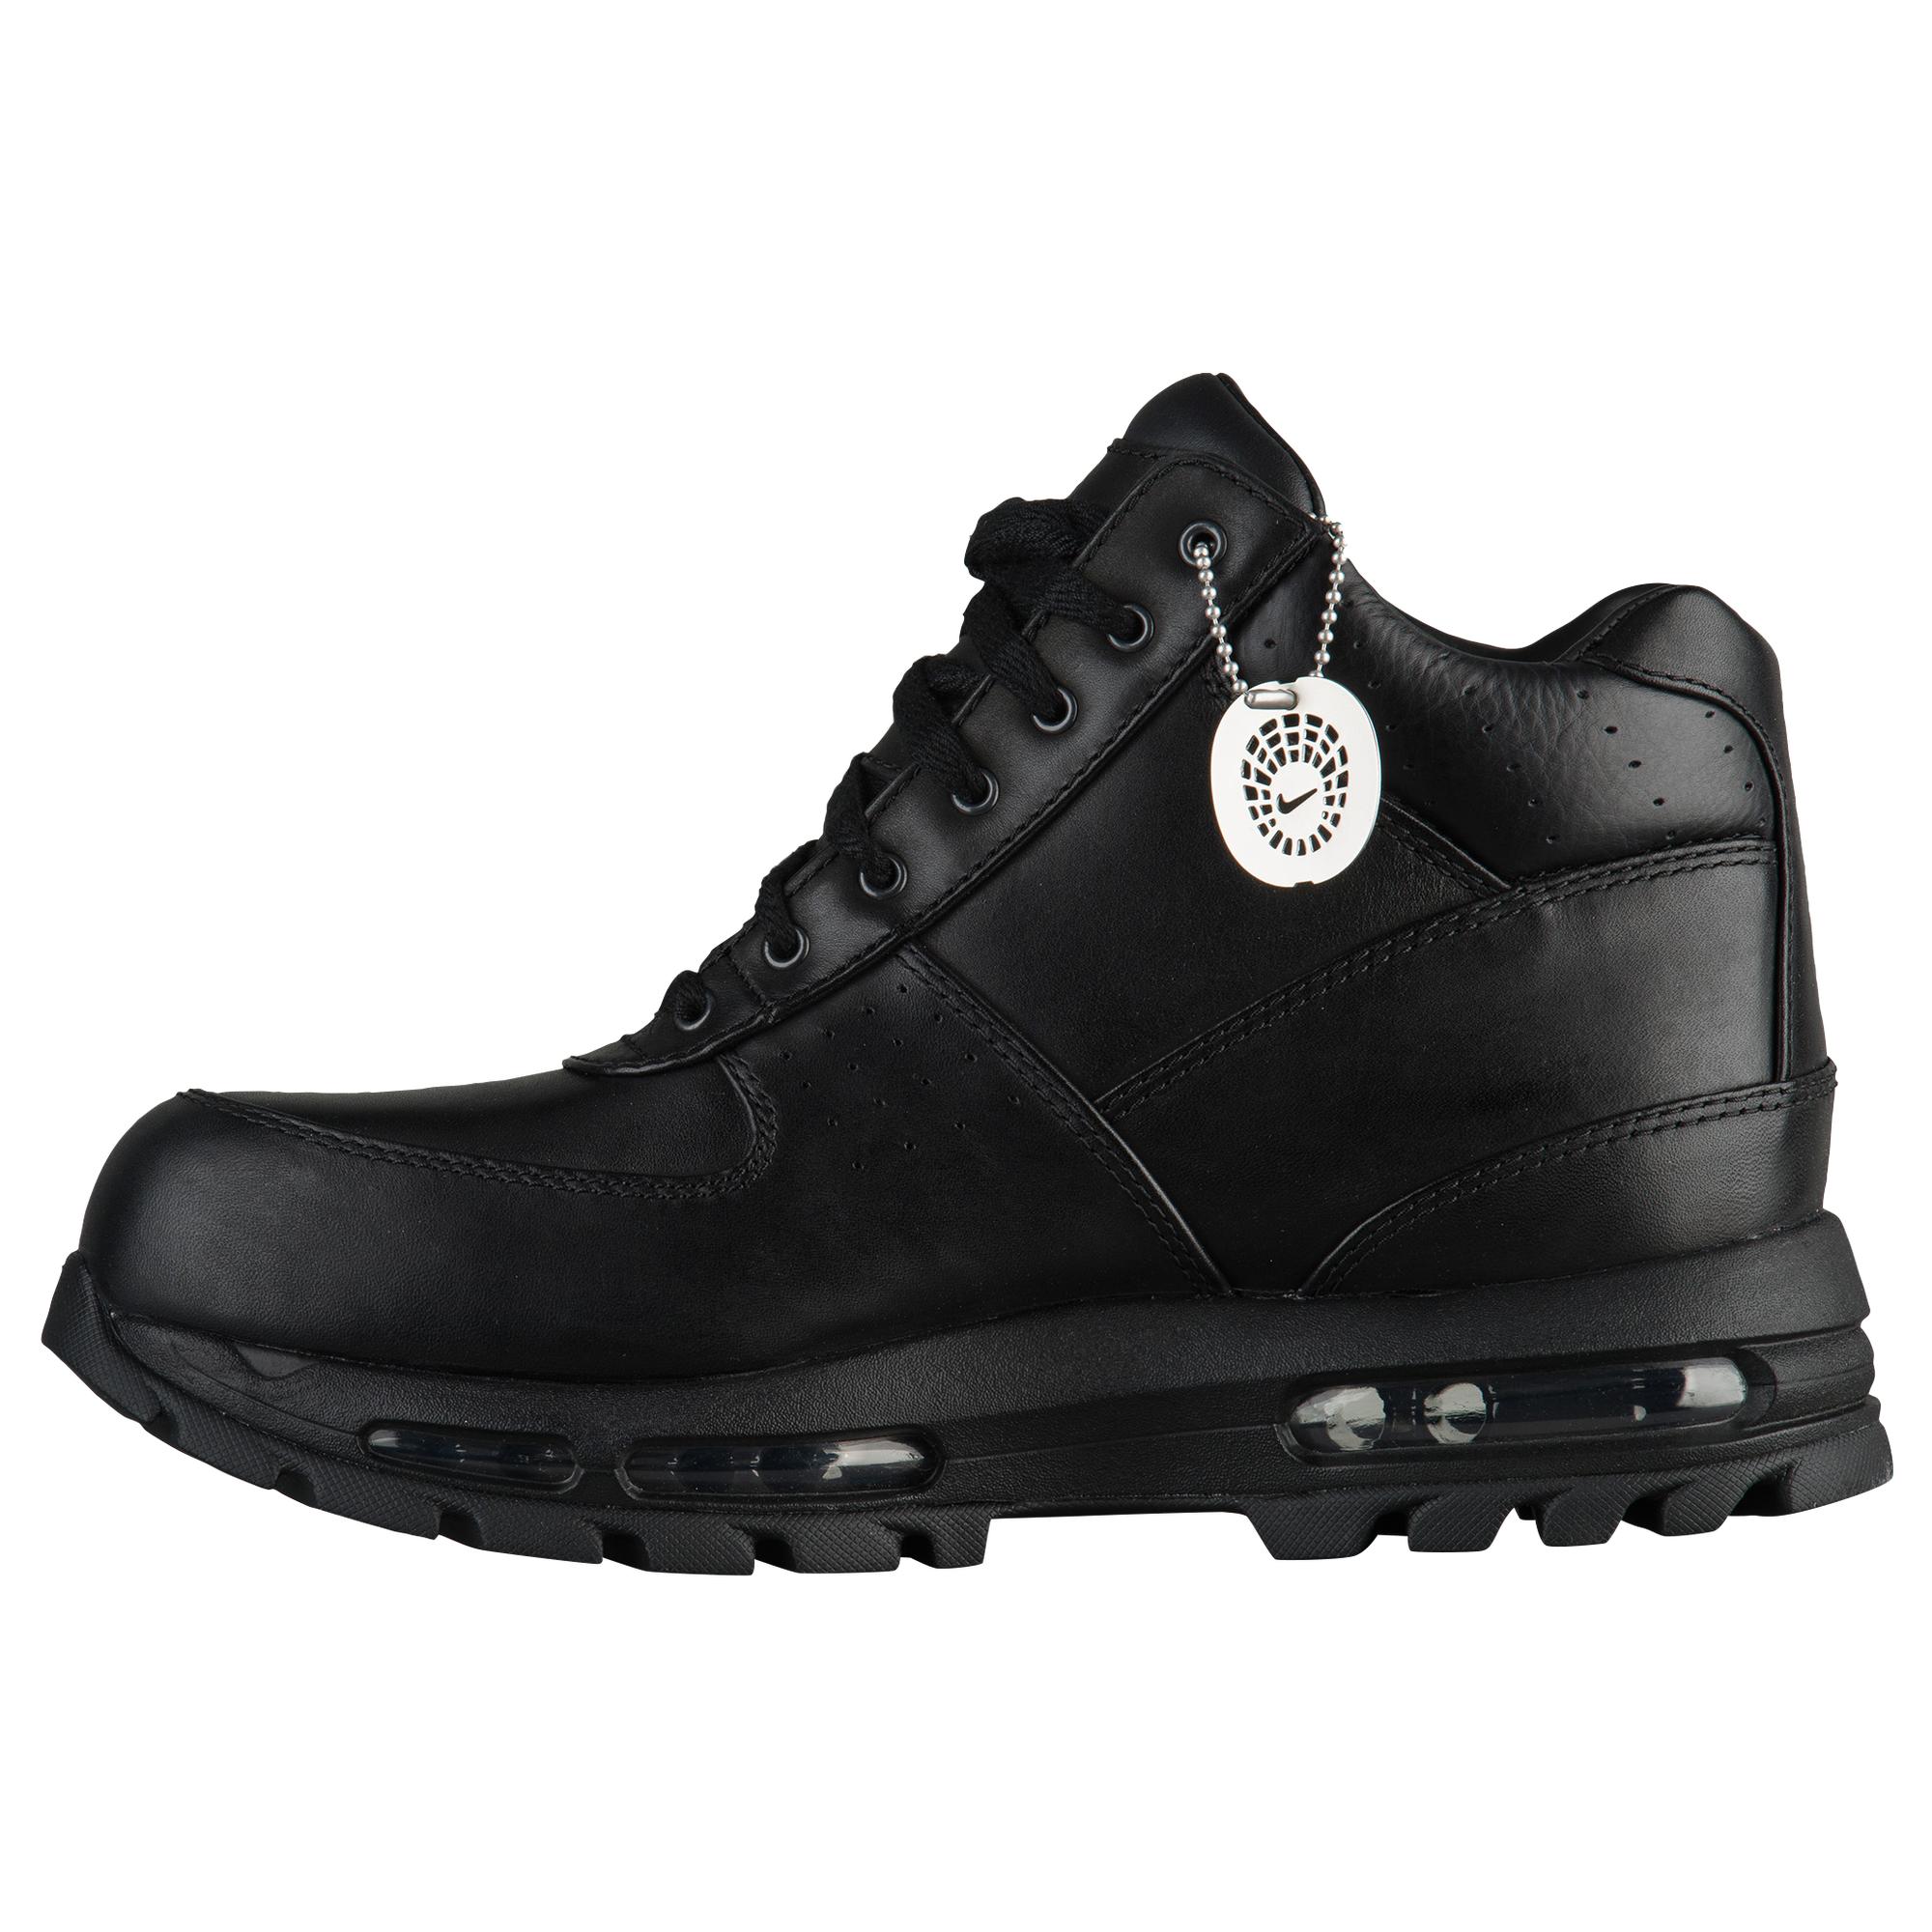 Nike Leather Air Max Goadome Boots in Black/Black/Black (Black) for Men -  Save 24% - Lyst